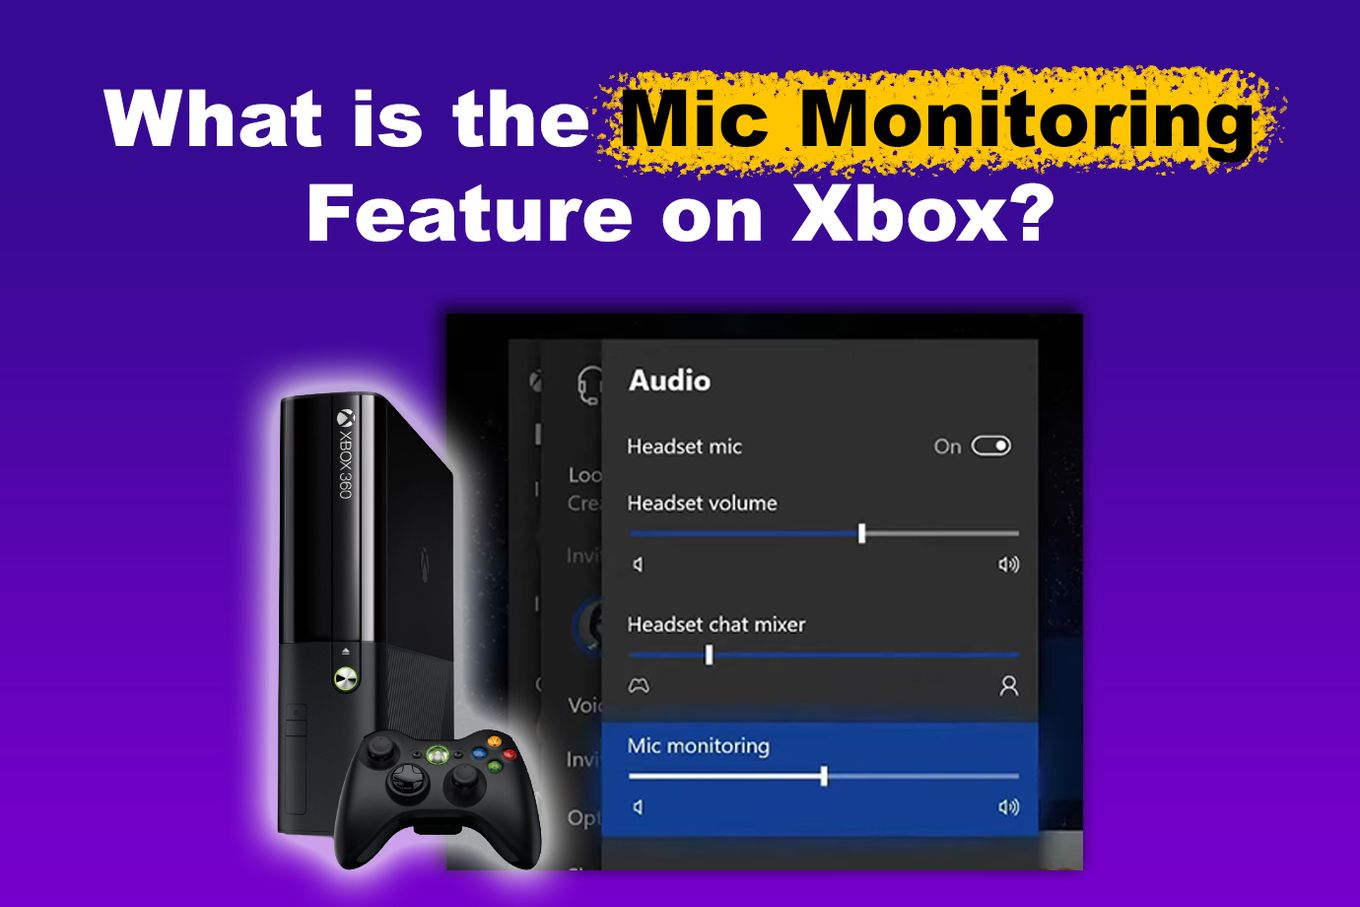 What is the Mic Monitoring Feature on Xbox?